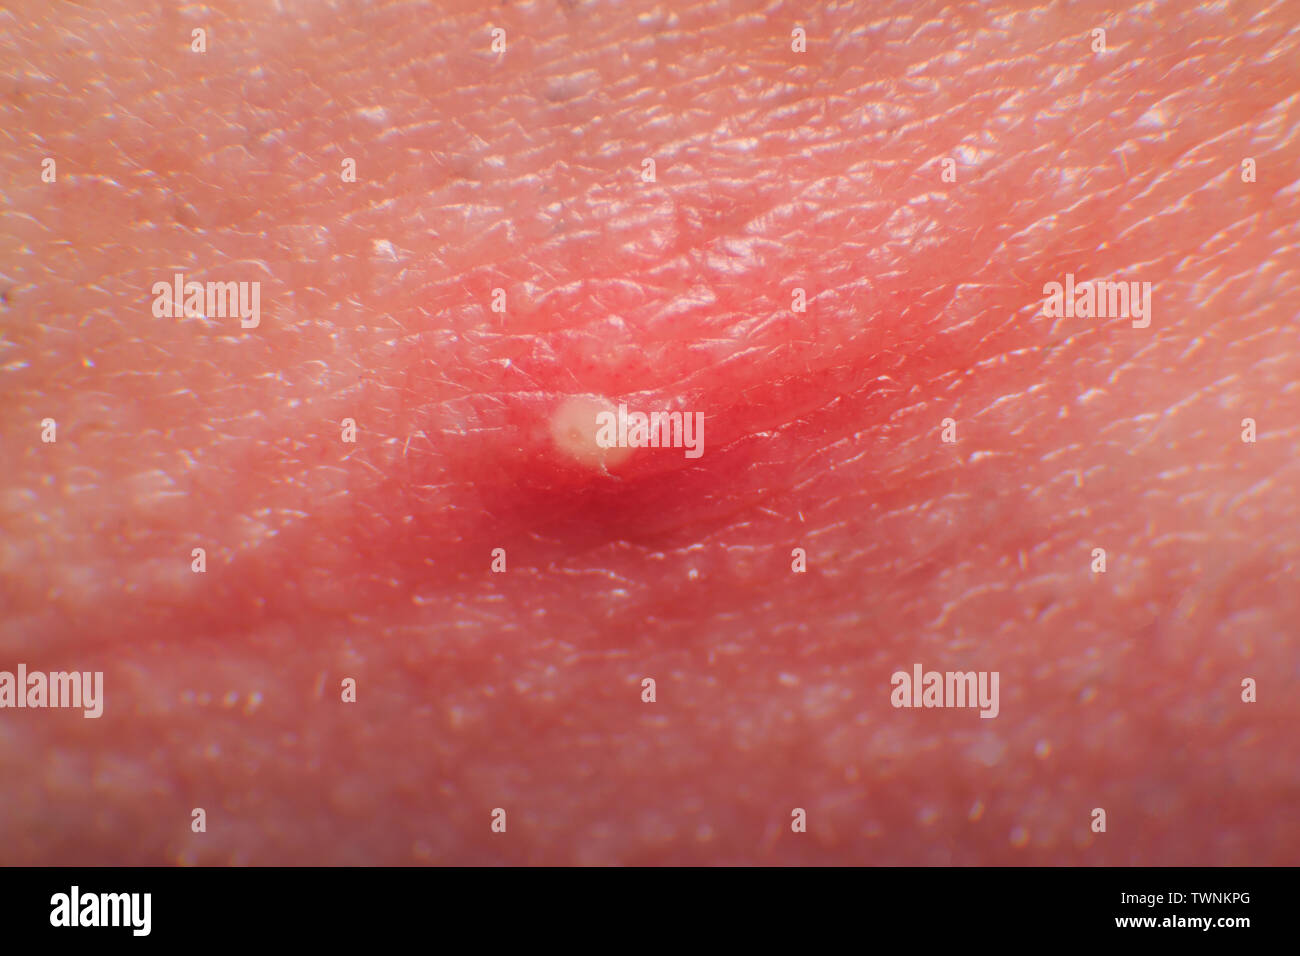 White pimple hair follicle inflammation on adult man skin Stock Photo -  Alamy